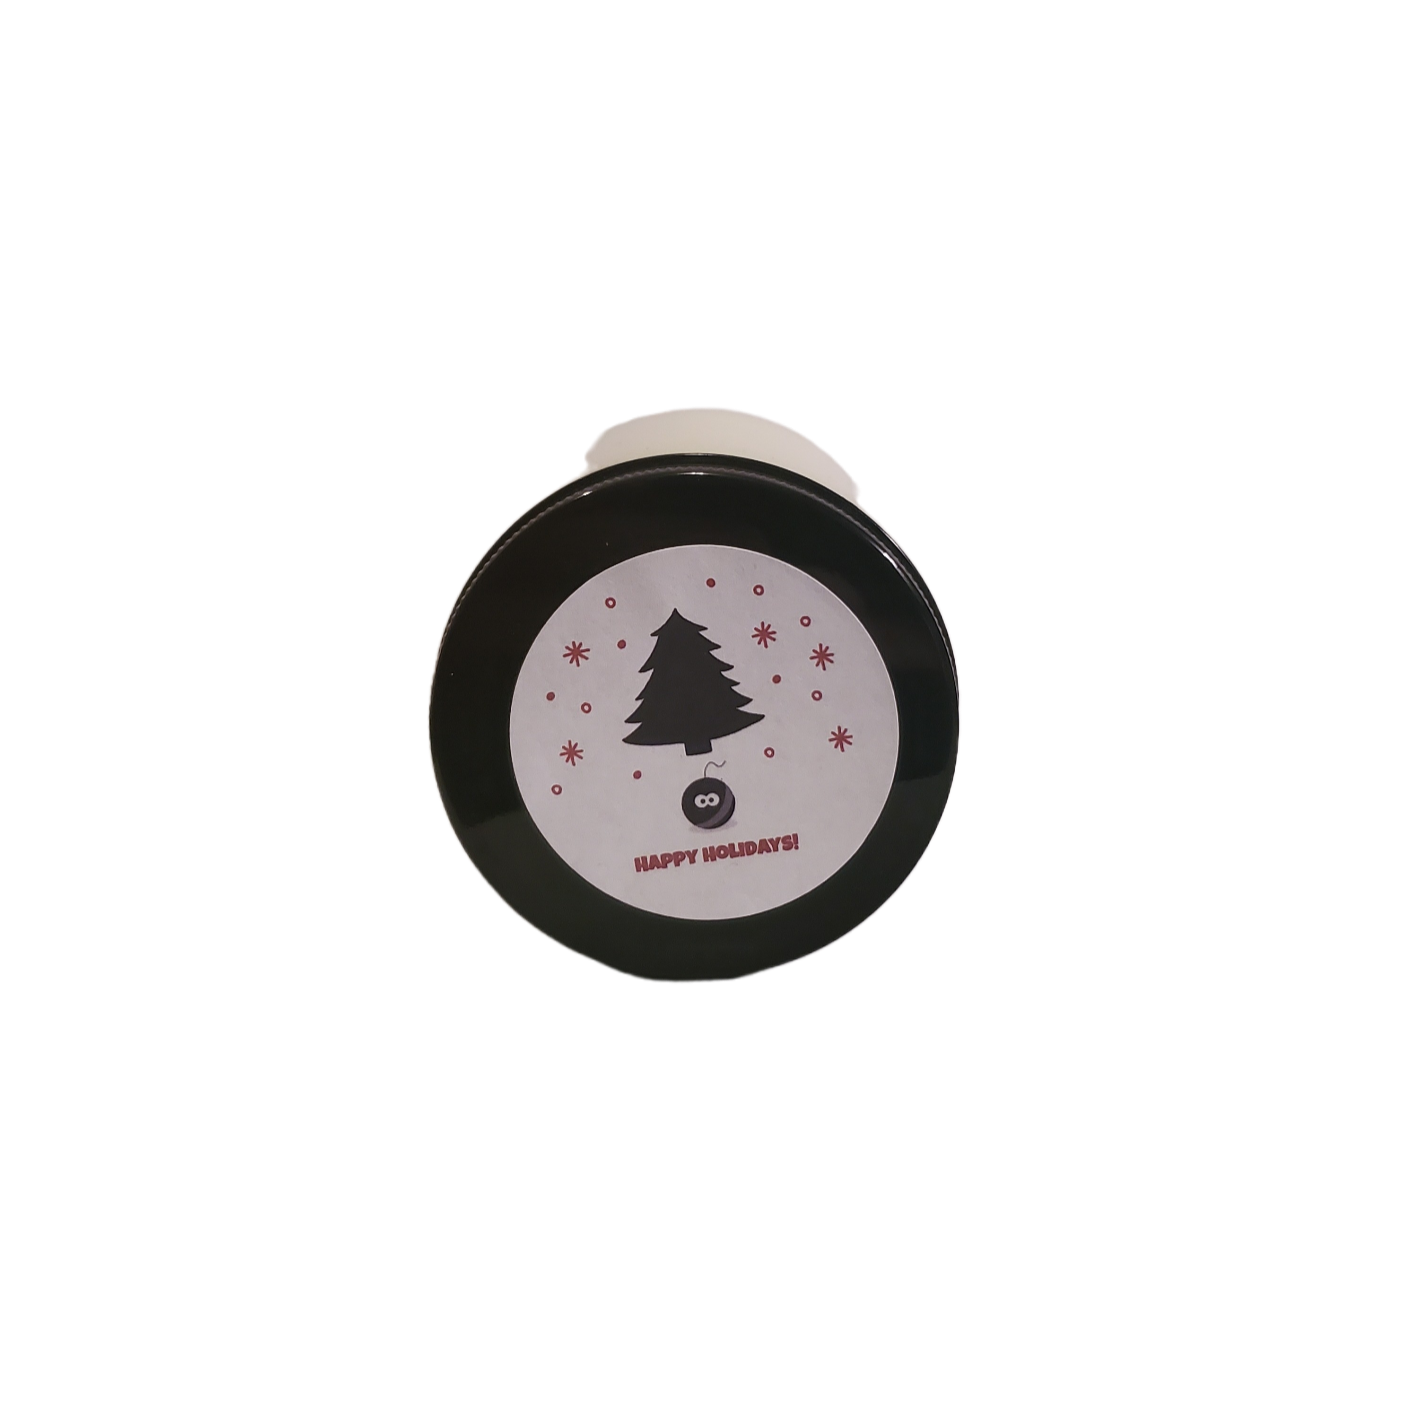 BERRY MERRY CHRISTMAS 8 OZ CANDLE - CrazyKooky Candles LLC